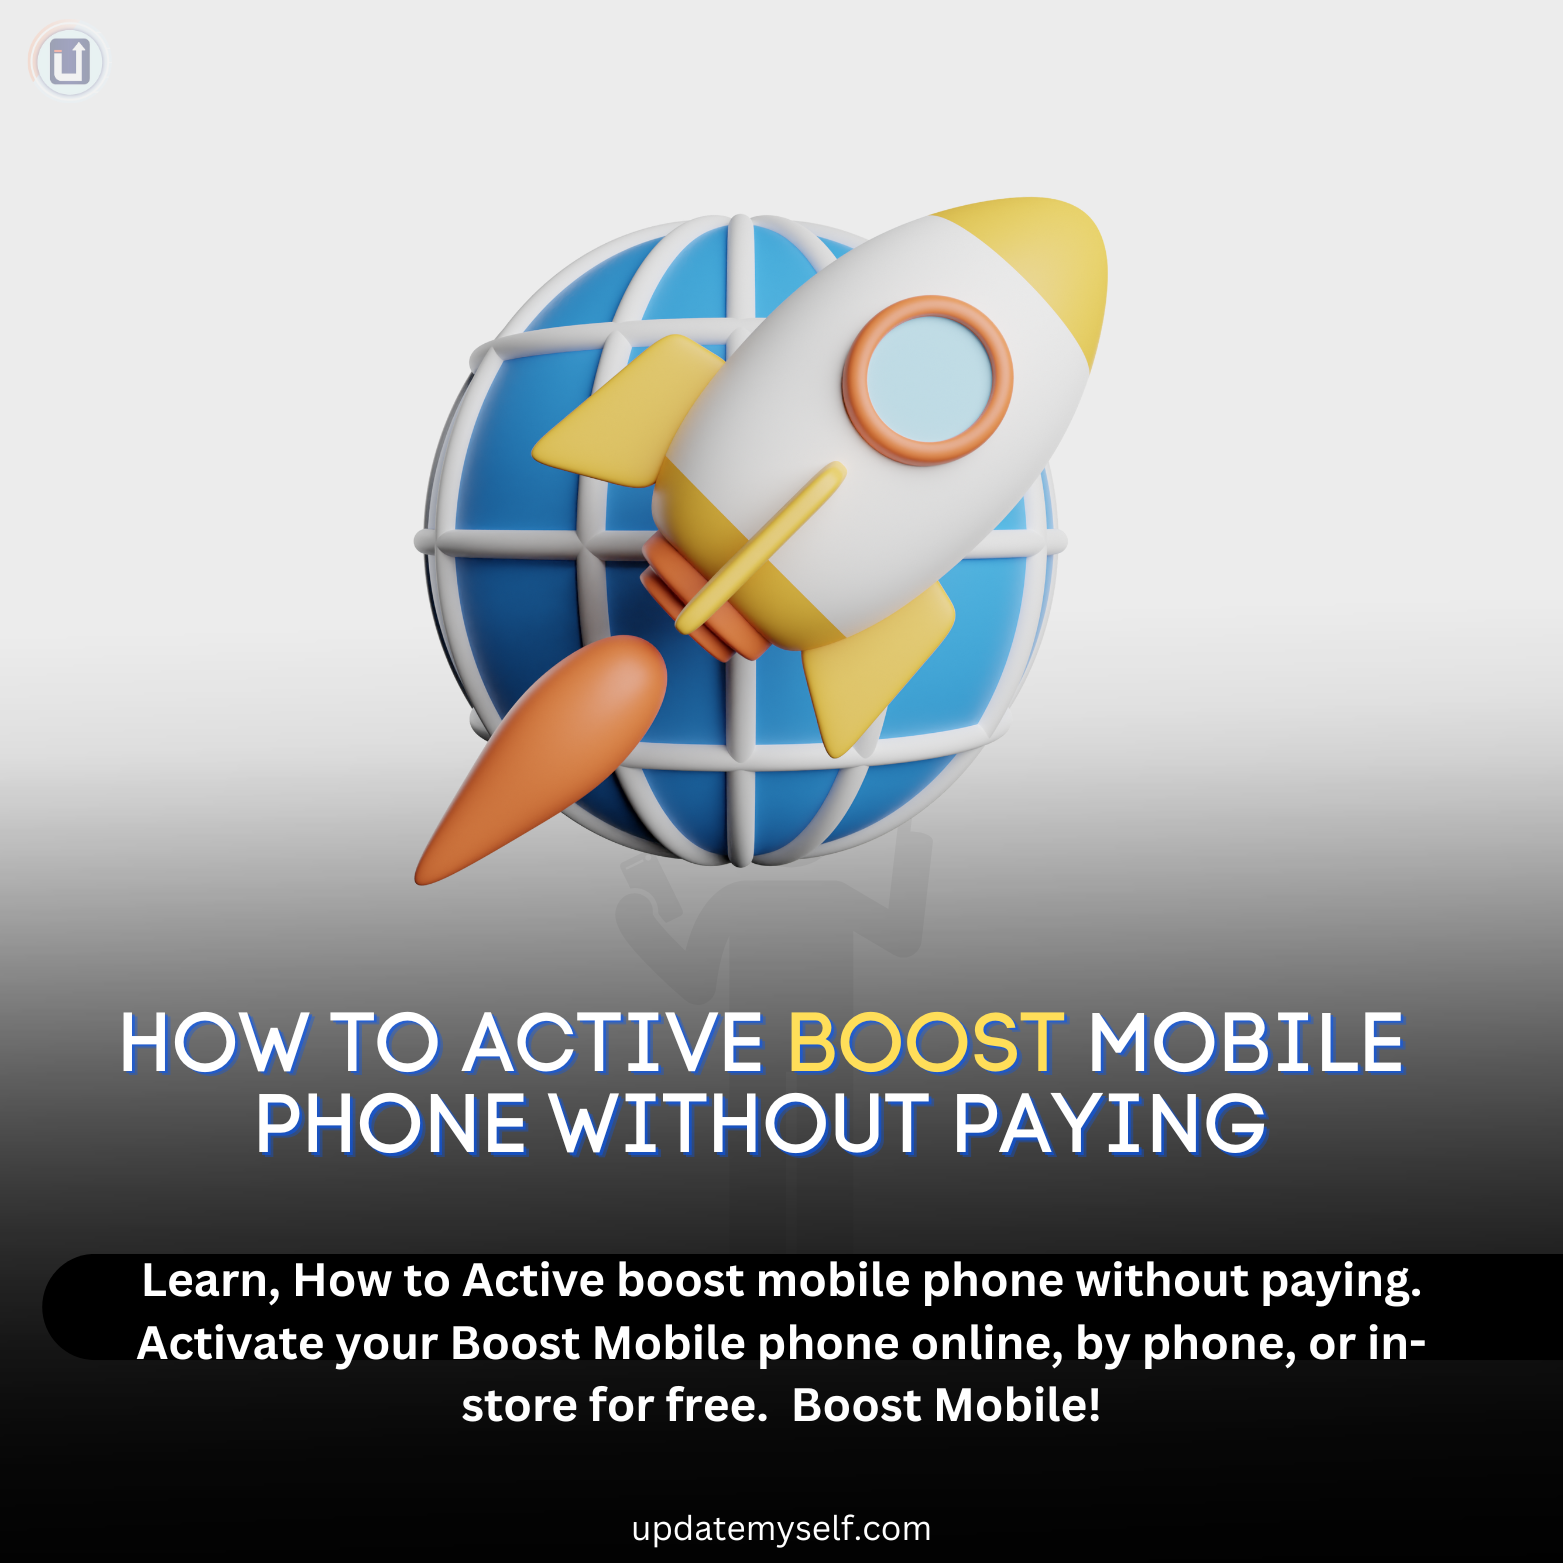 How to active boost mobile phone without paying